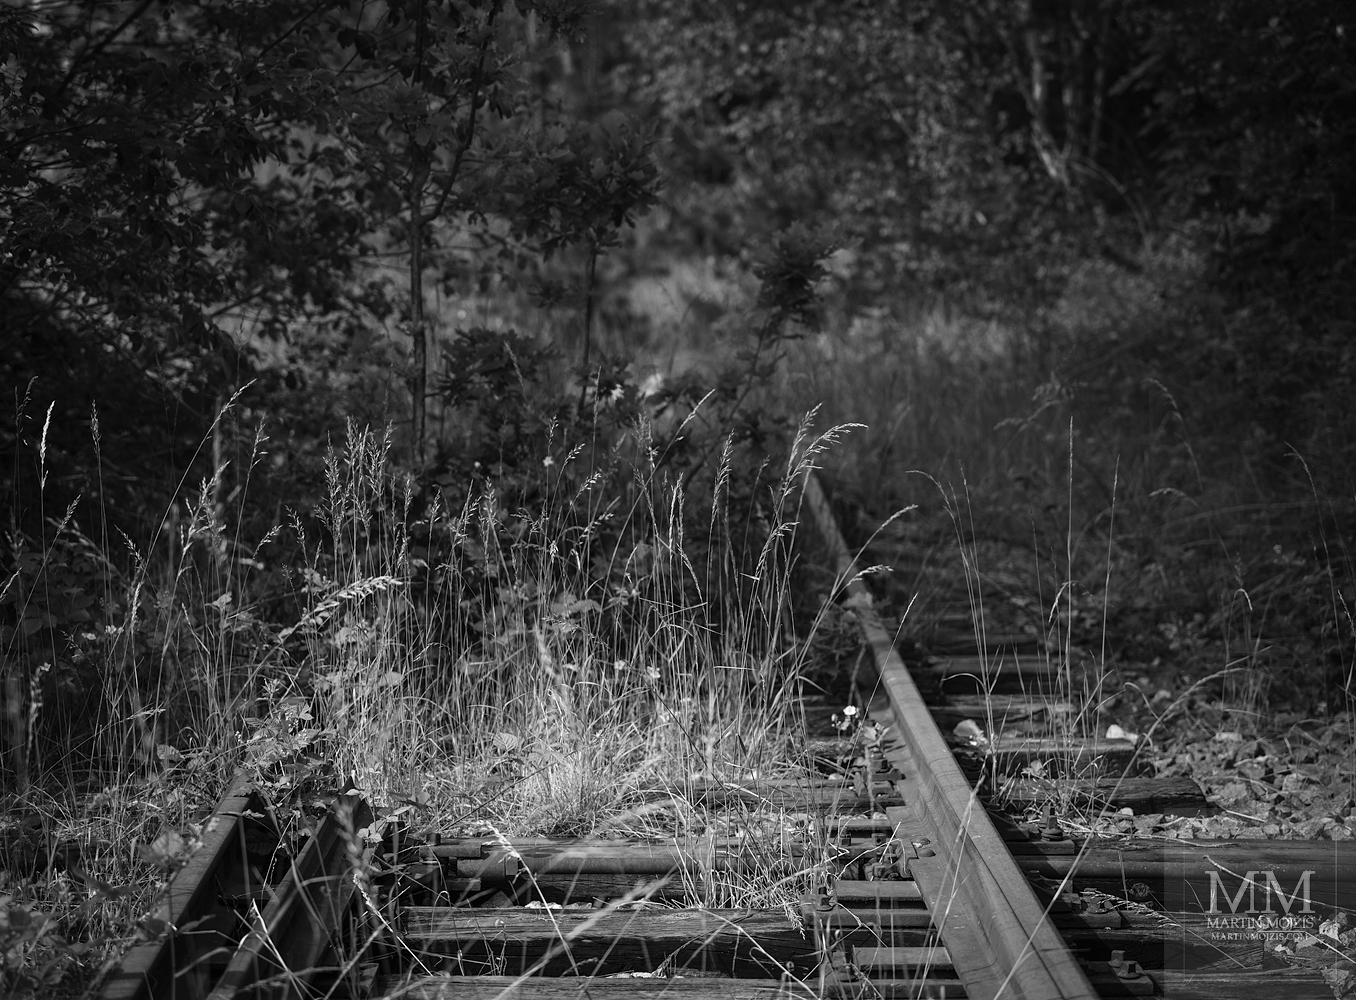 A railway siding overgrown with grass. Fine art photograph THE TRAINS HAVE ALREADY LEFT II, photographed by Martin Mojzis.